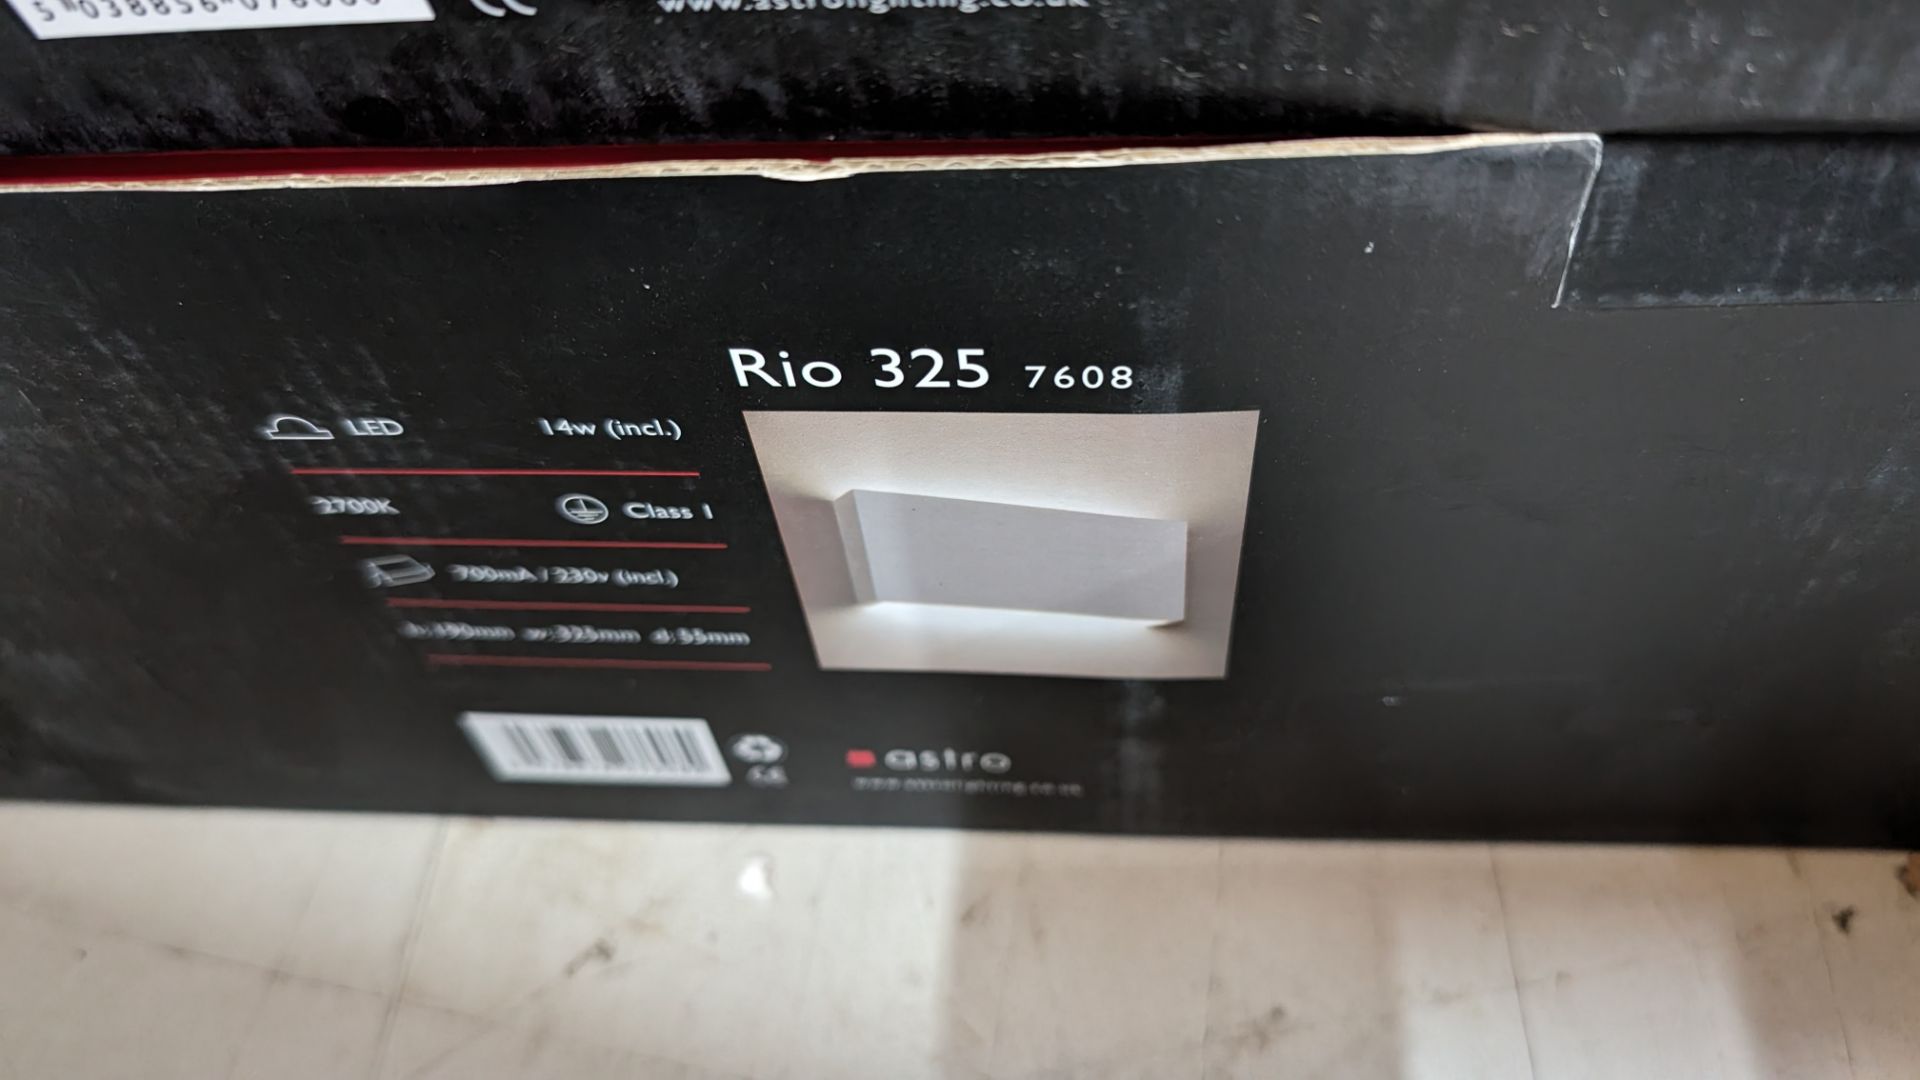 2 off Astro Rio 325 plaster wall lights - complete units - Image 4 of 4